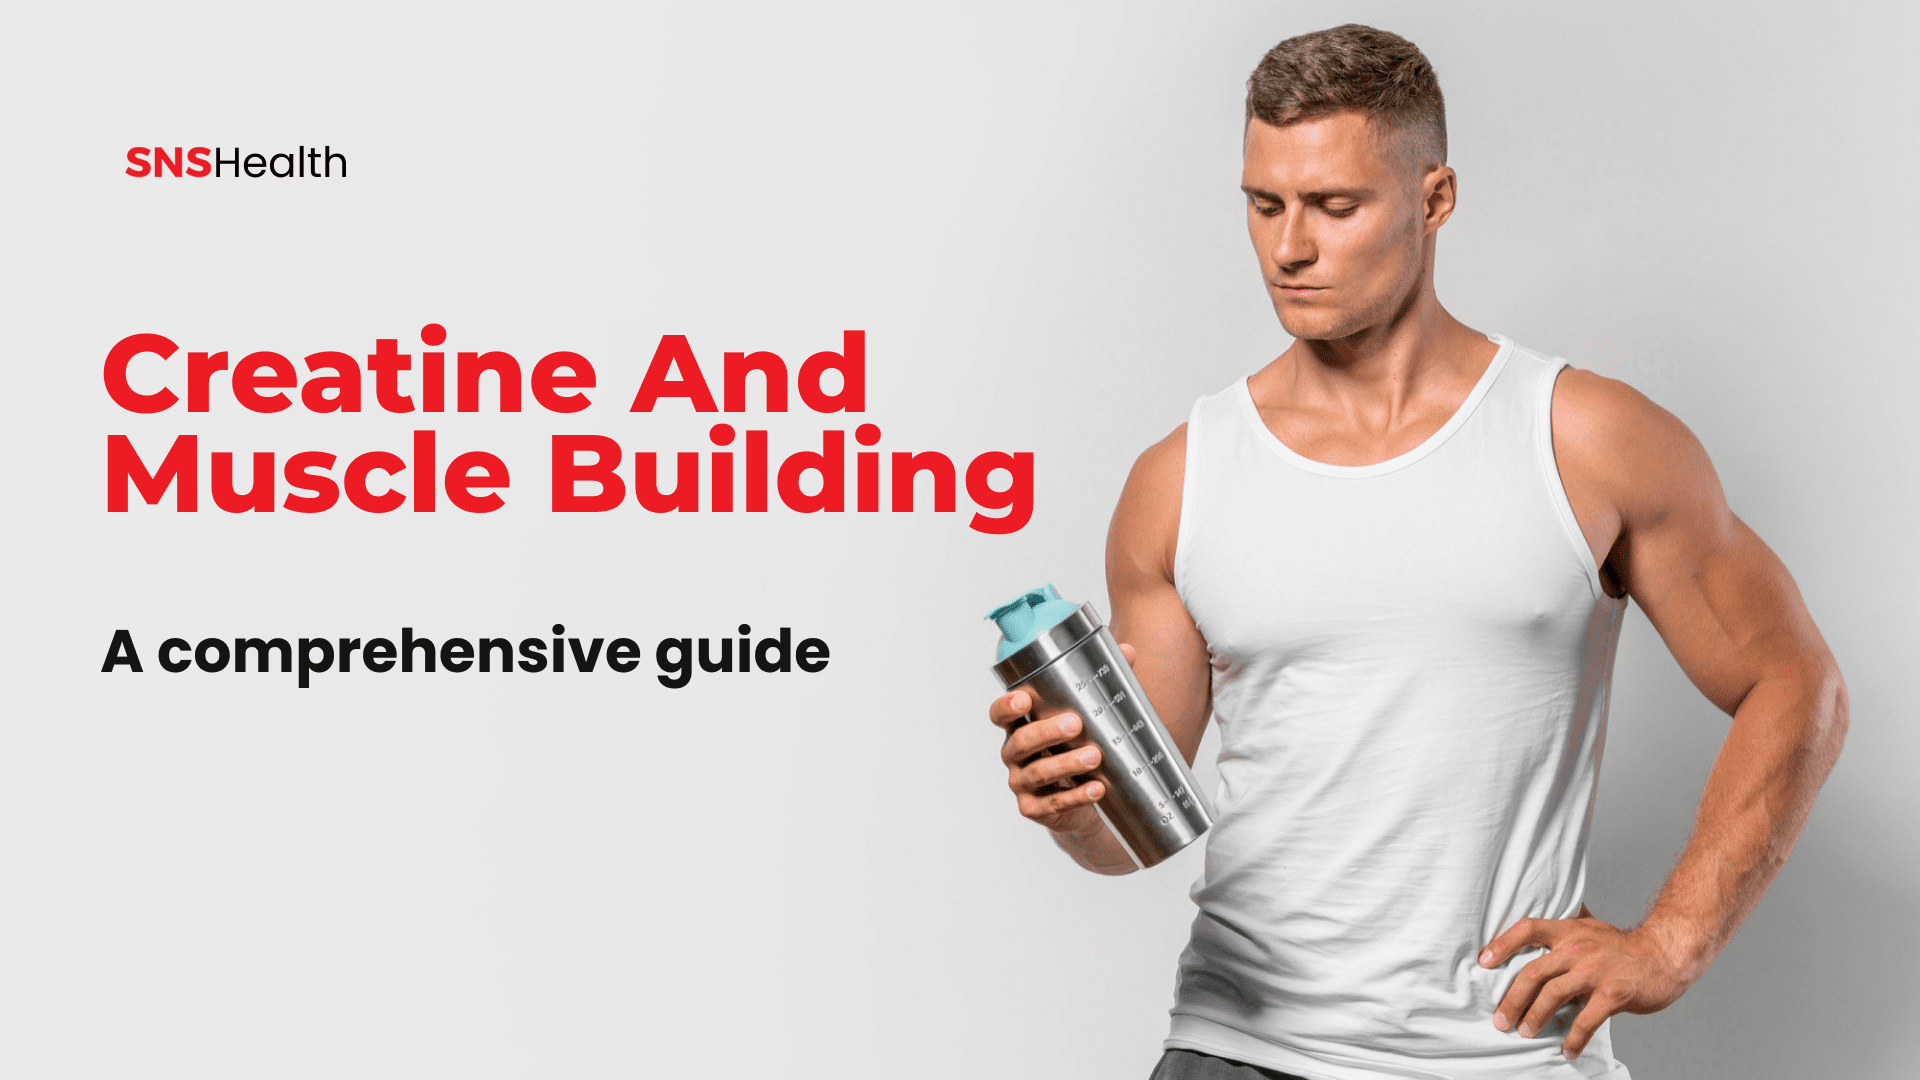 Creatine and muscle building A comprehensive guide